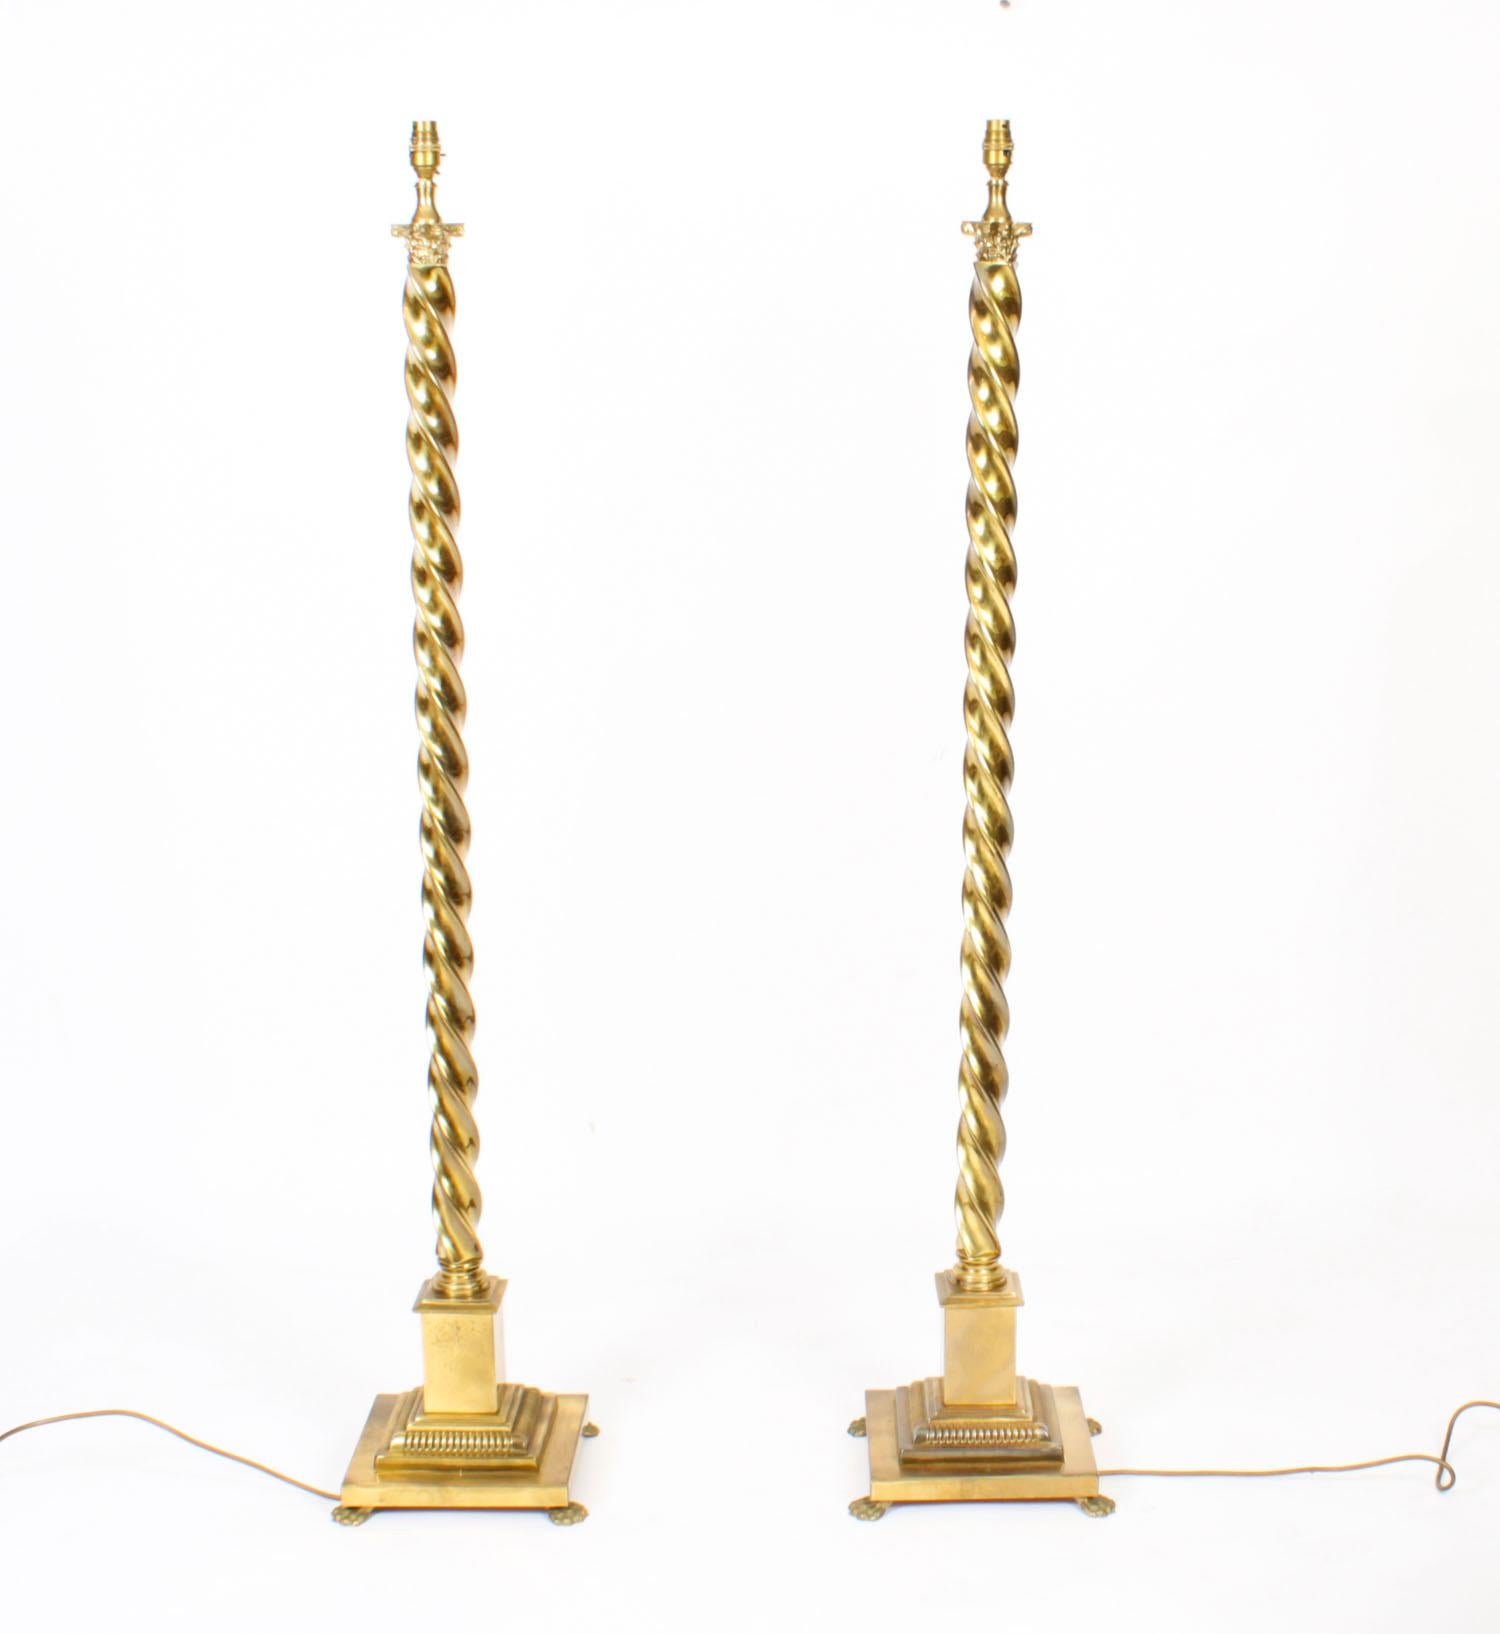 This is a beautiful antique pair of Victorian brass floor standard lamps now converted to electricity, circa 1890 in date.

The splendid lamps feature distinguished twisted cylindrical columns topped with Corinthian capitals. 

They stand on